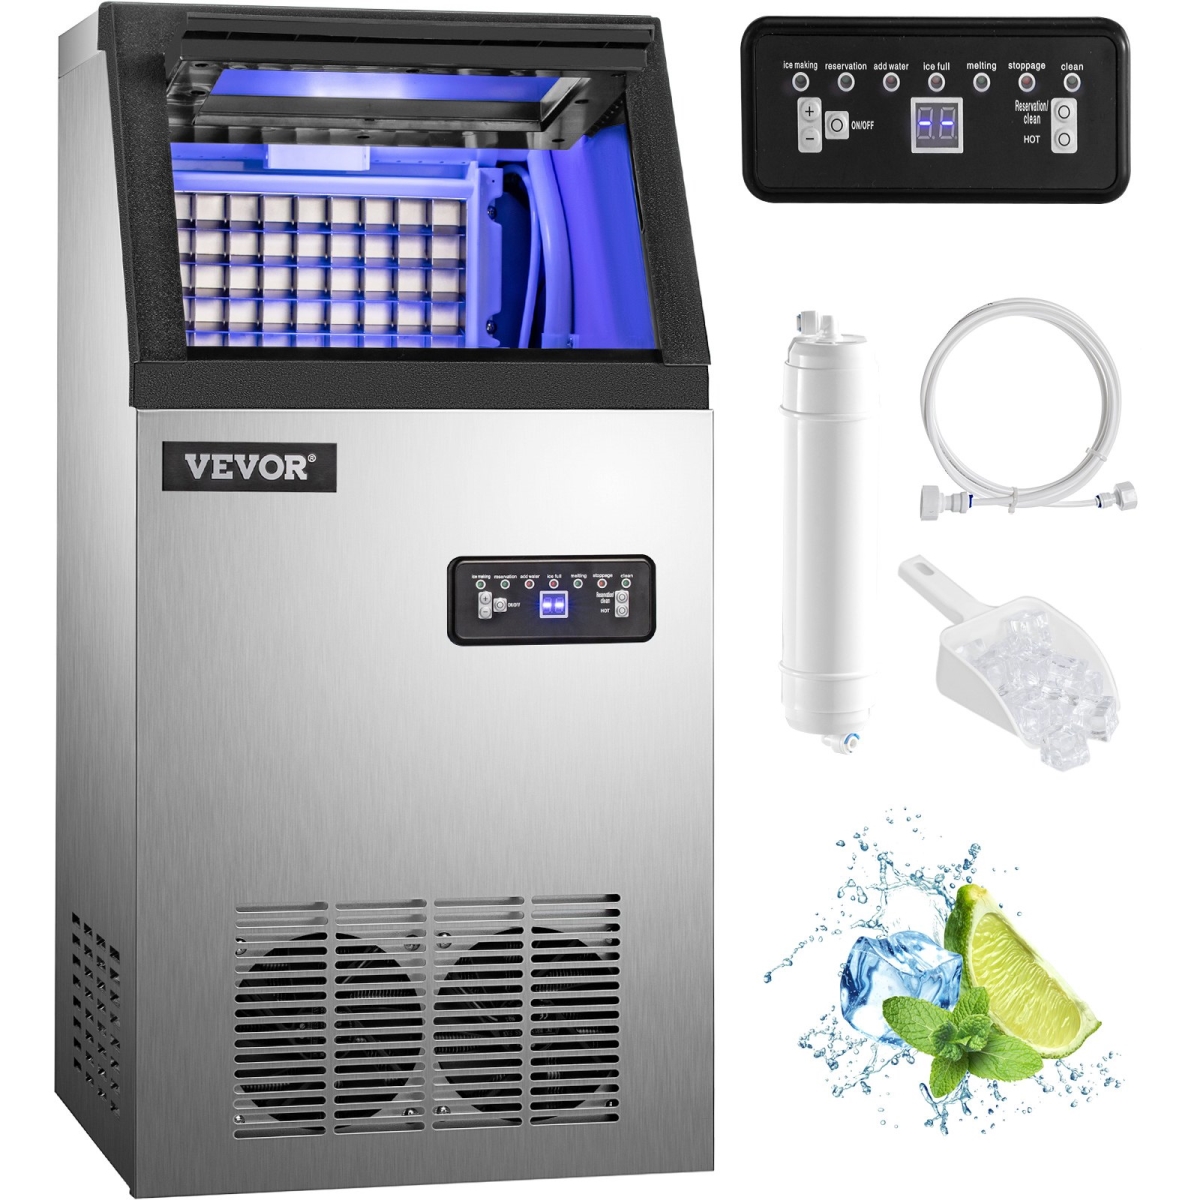 Picture of Vevor 68KGSYZBJ00000001V1 110V Commercial Ice Maker - 120 lbs with 22 lbs Storage Ice Maker Machine Stainless Steel Portable Automatic Ice Machine with Scoop & Connection Hoses Perfect